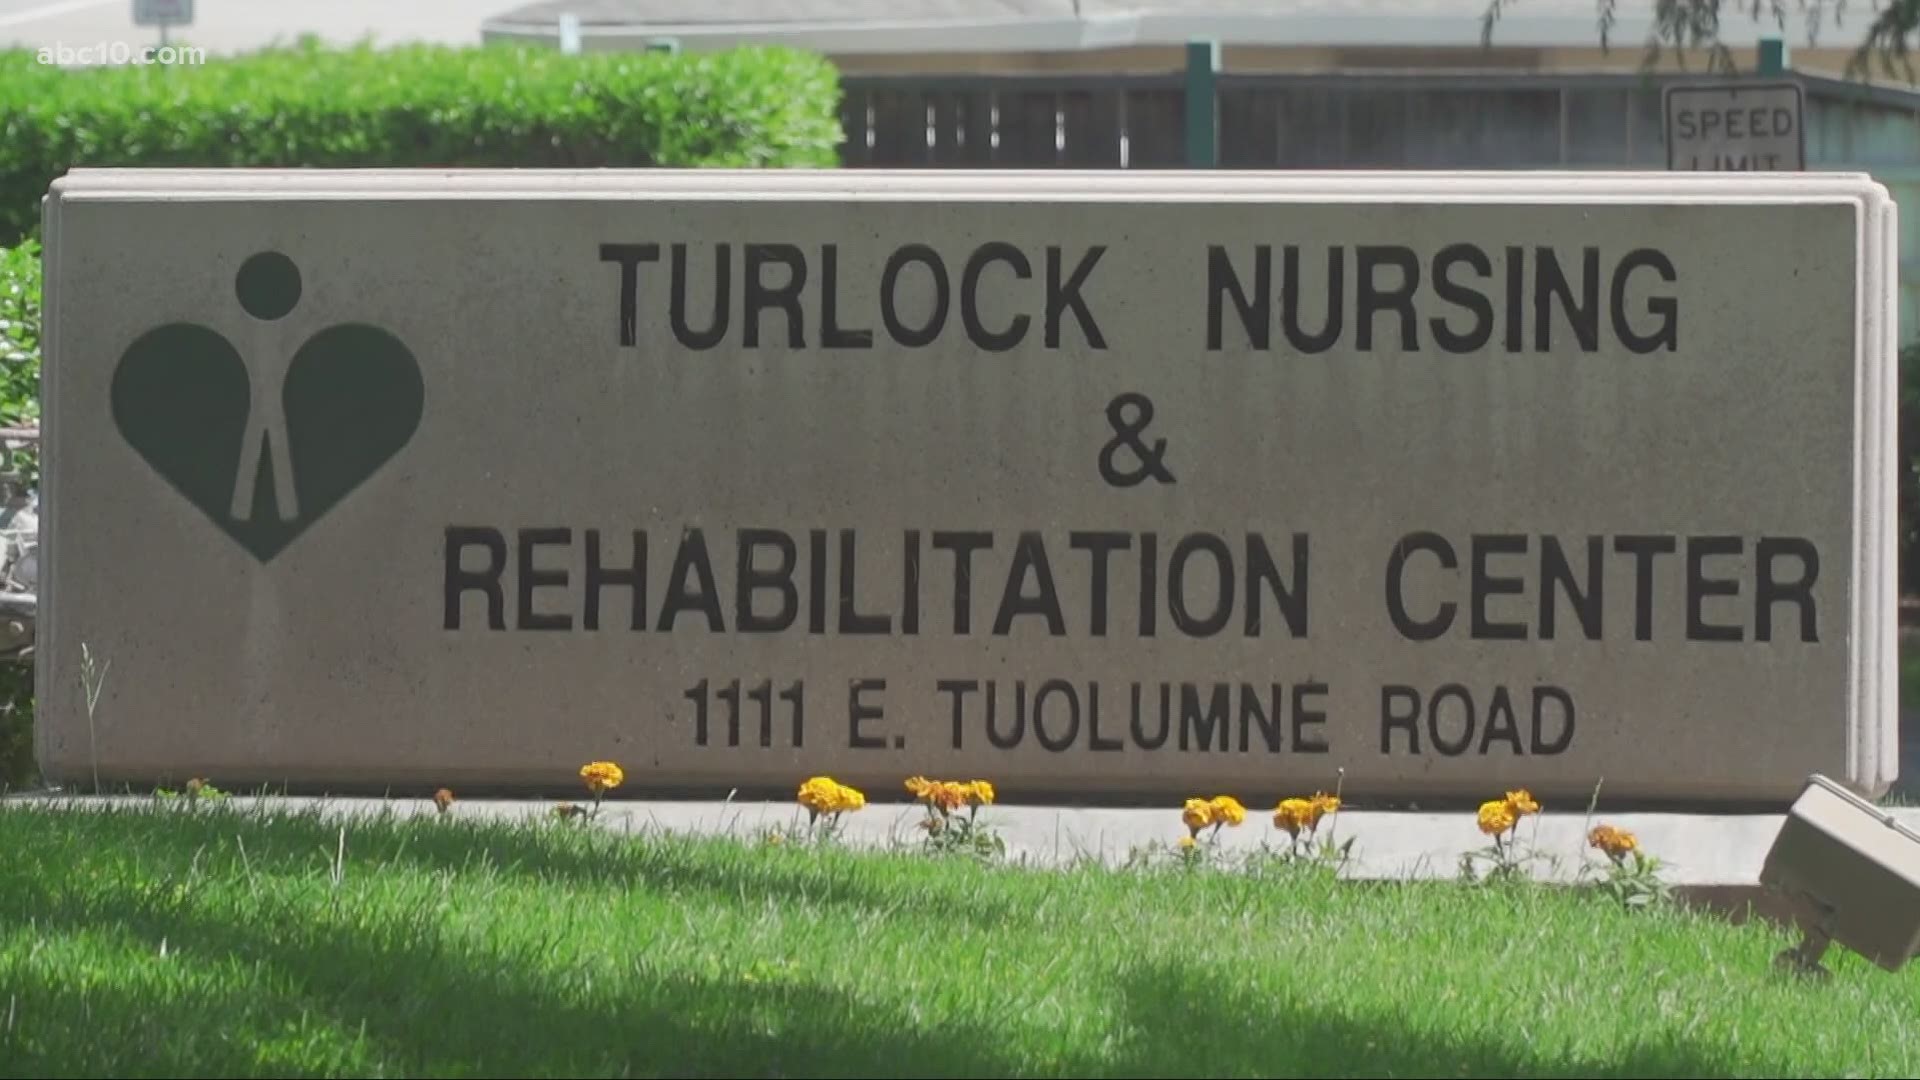 According to the Turlock Nursing and Rehabilitation Center, confirmed cases went from six to 51 in just a few days.